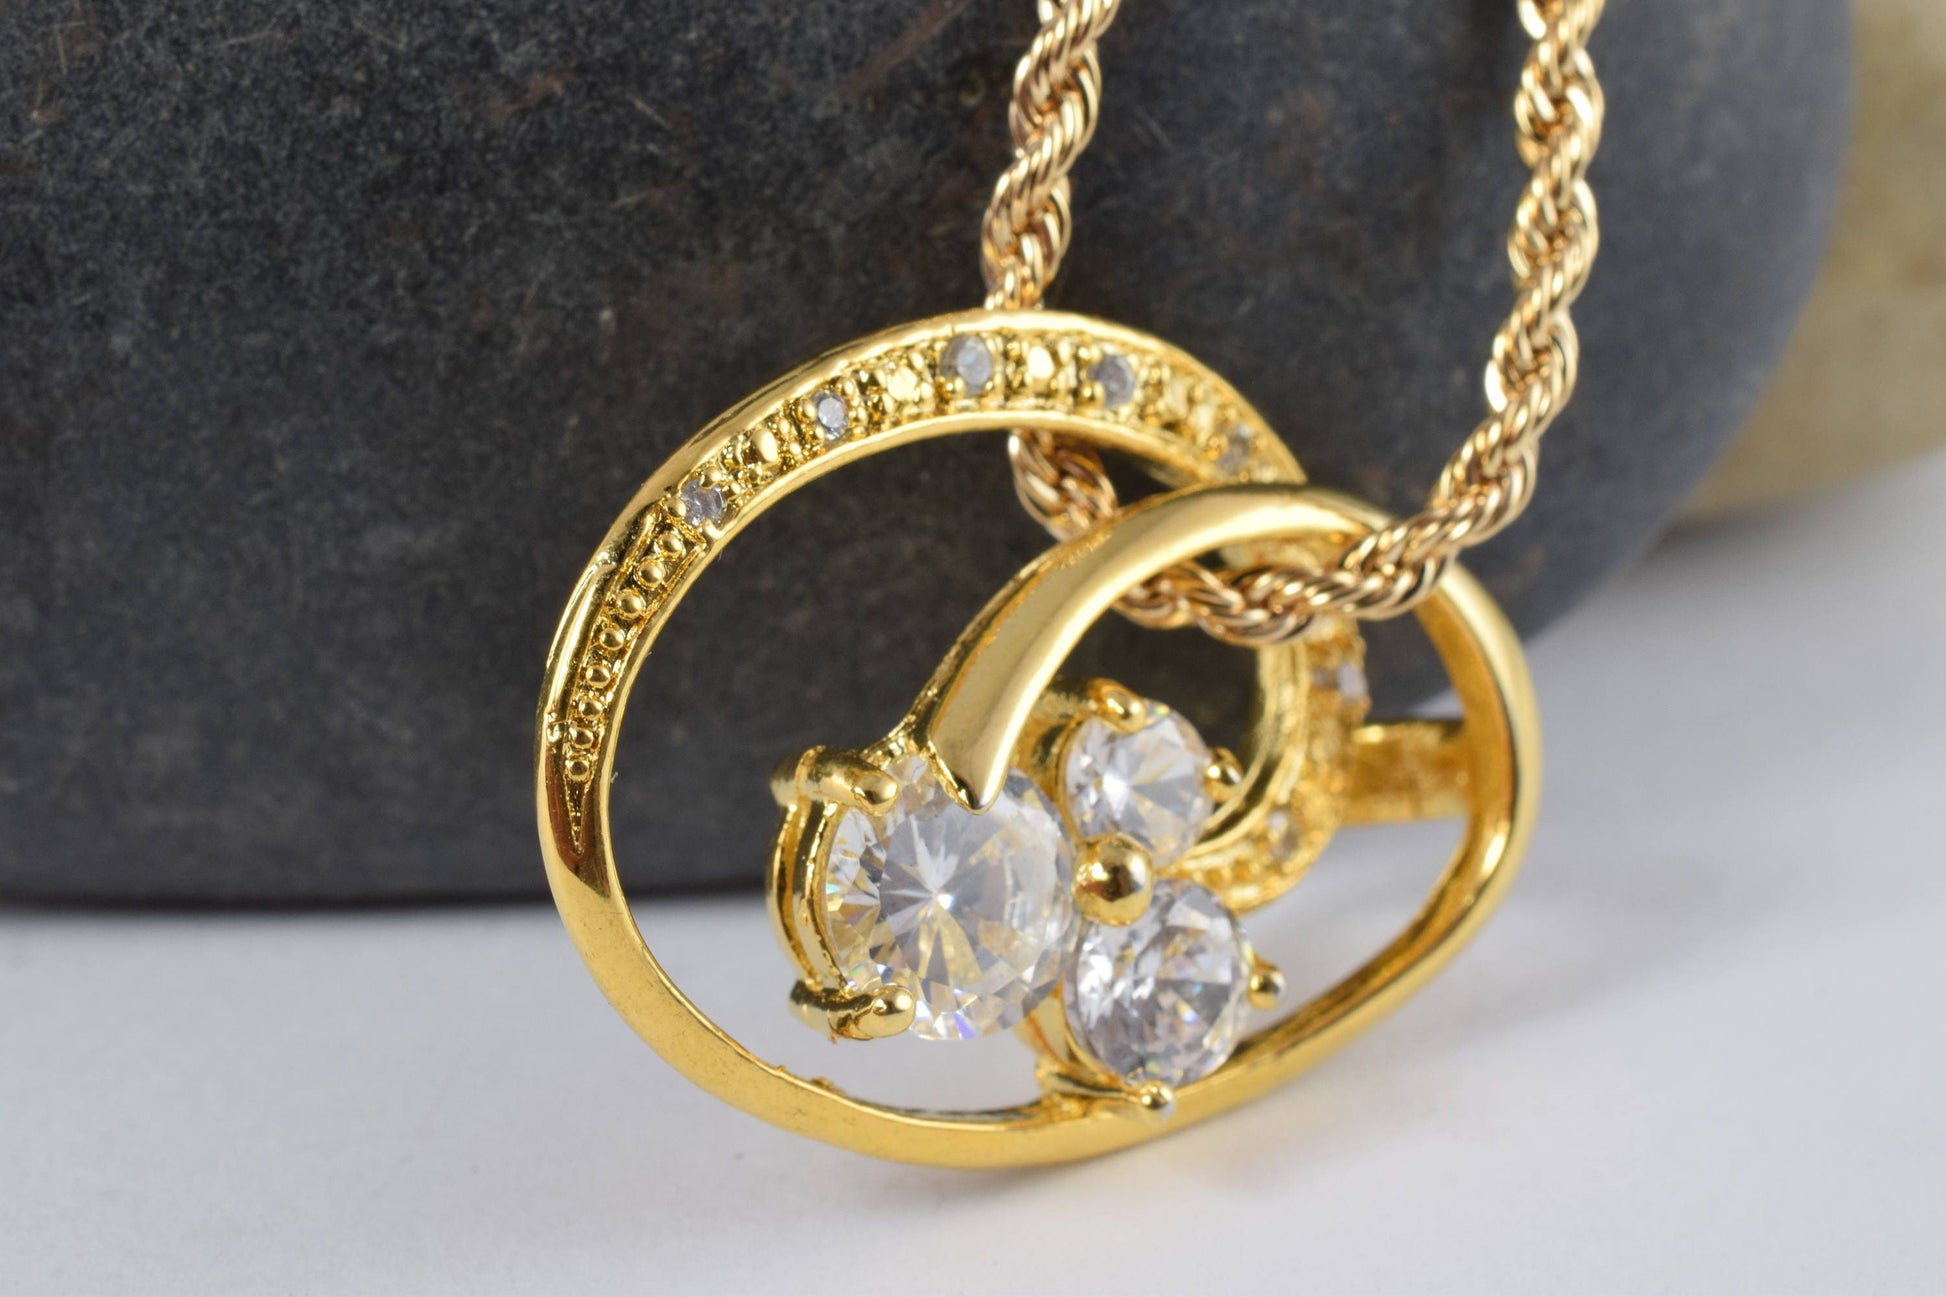 24x32mm 18KT Gold Filled CubicZirconiaCircle Pendant Elegant Design Infinity Round Cubic Zirconia Crystal, Gold Filled Pendant,Jewelry Charm